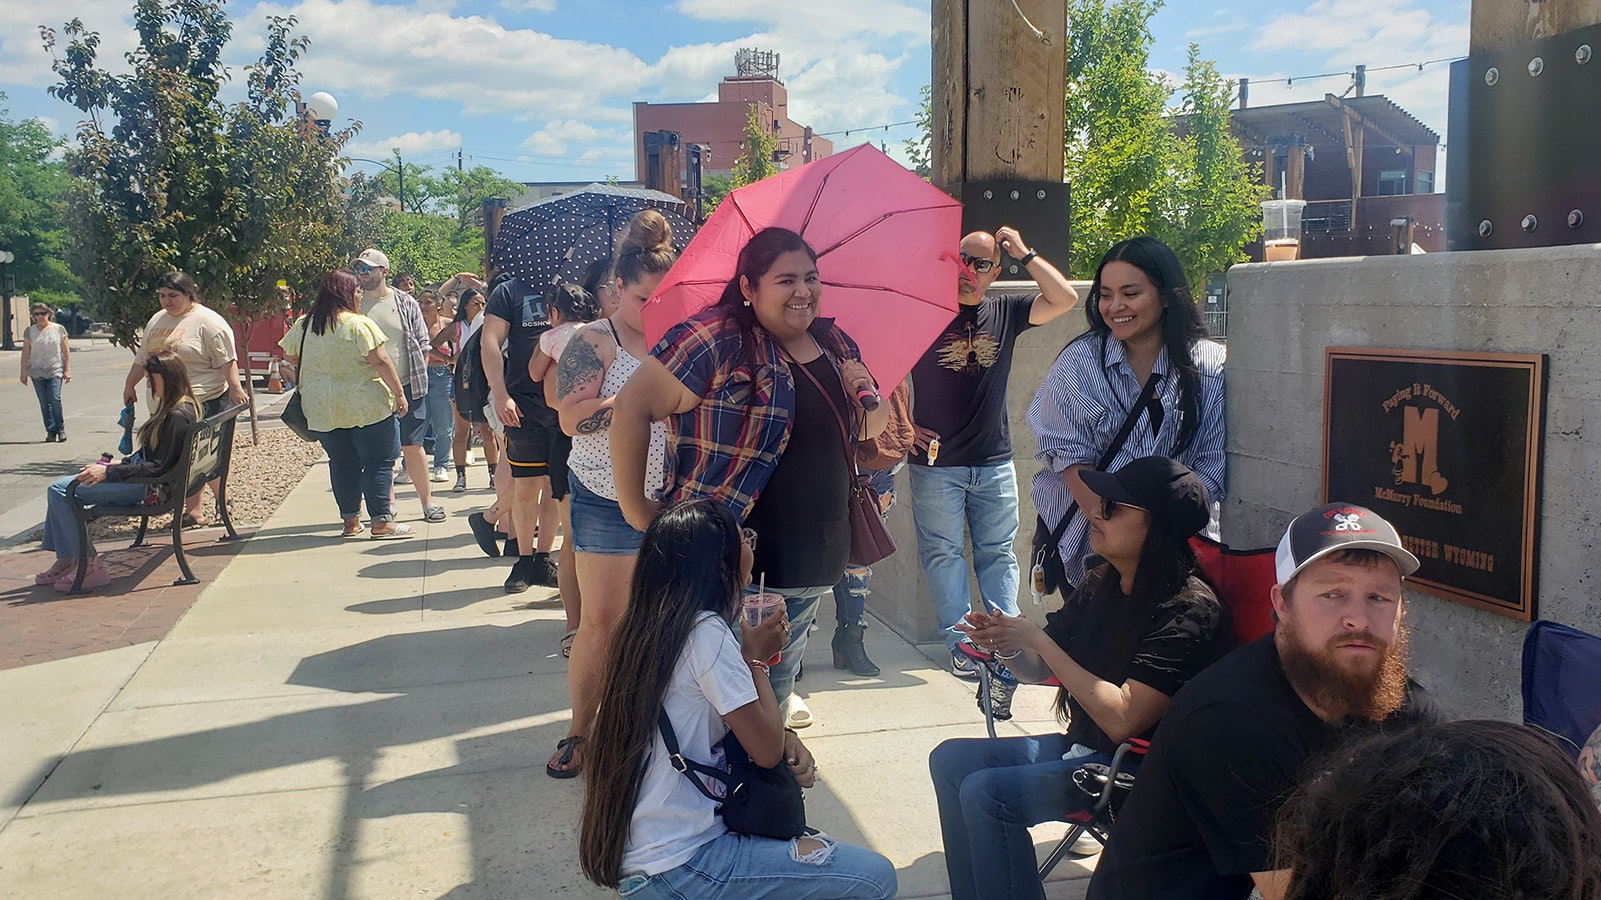 Margarita Padilla with the pink umbrella stands in line with sister Eva back, right. Just ahead of them are cousin Tiffany Hinojosa and Hinojosa's mom, Ivette Pizarro.